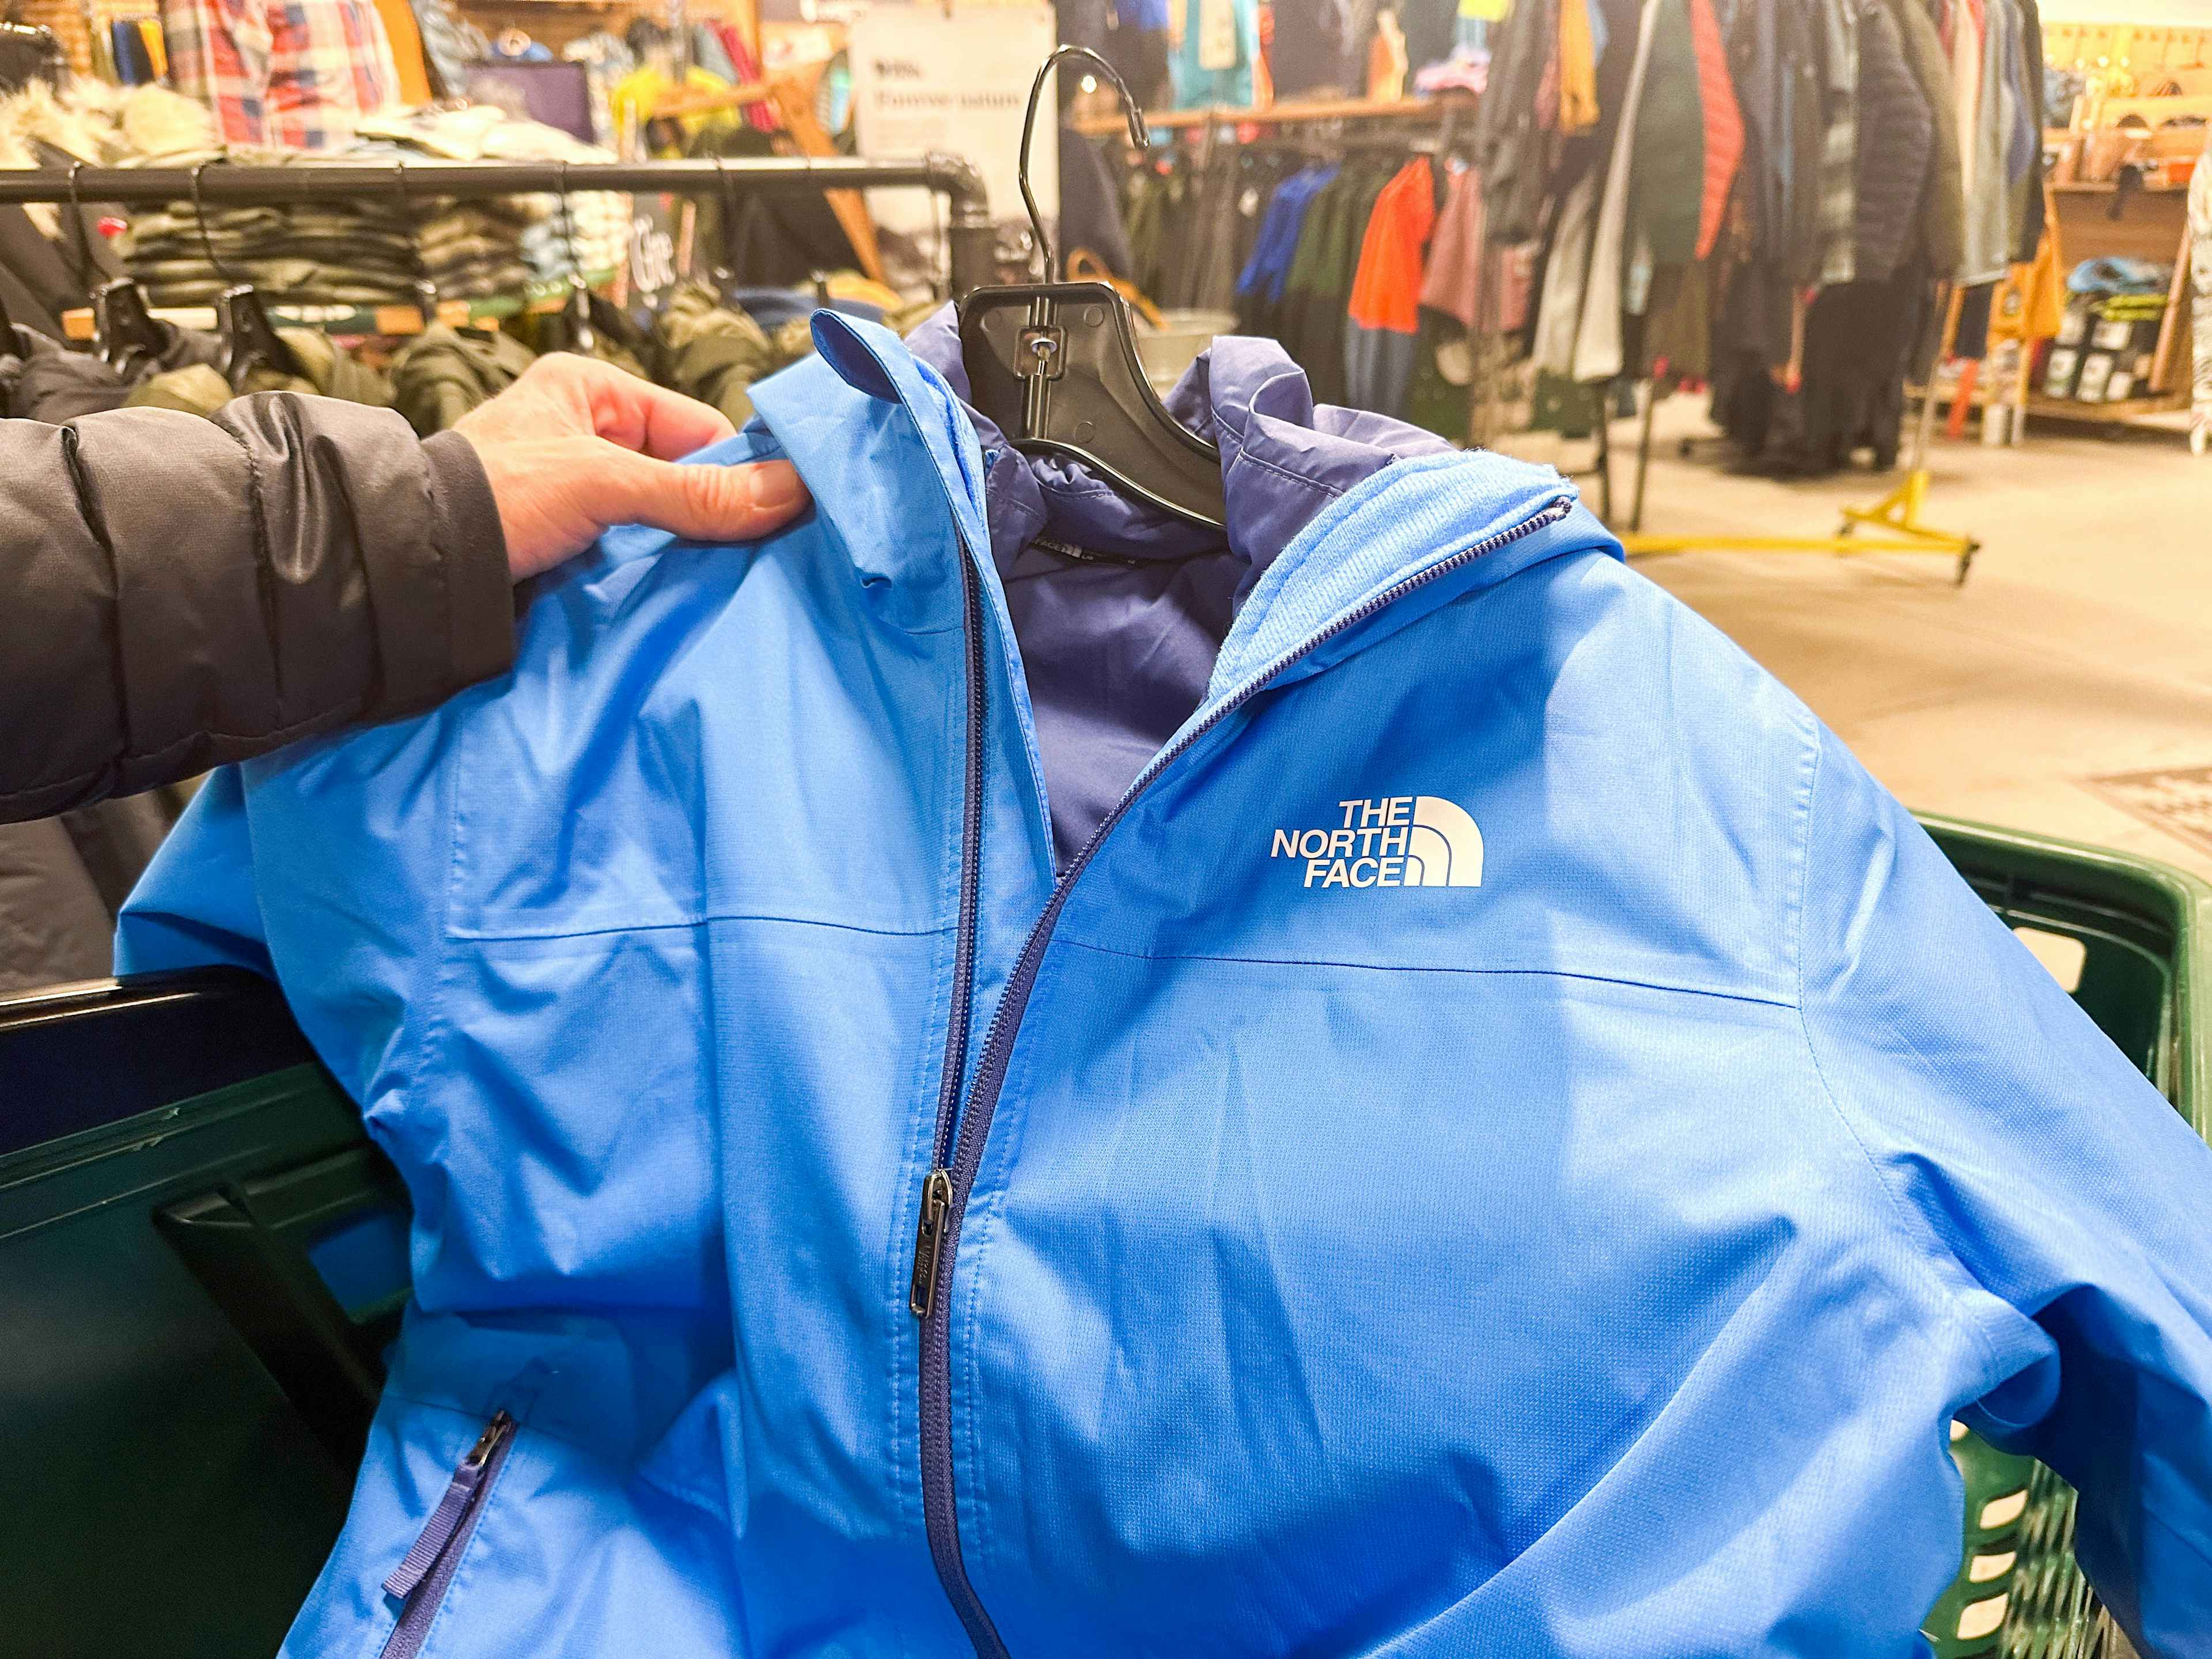 north face jacket in cart